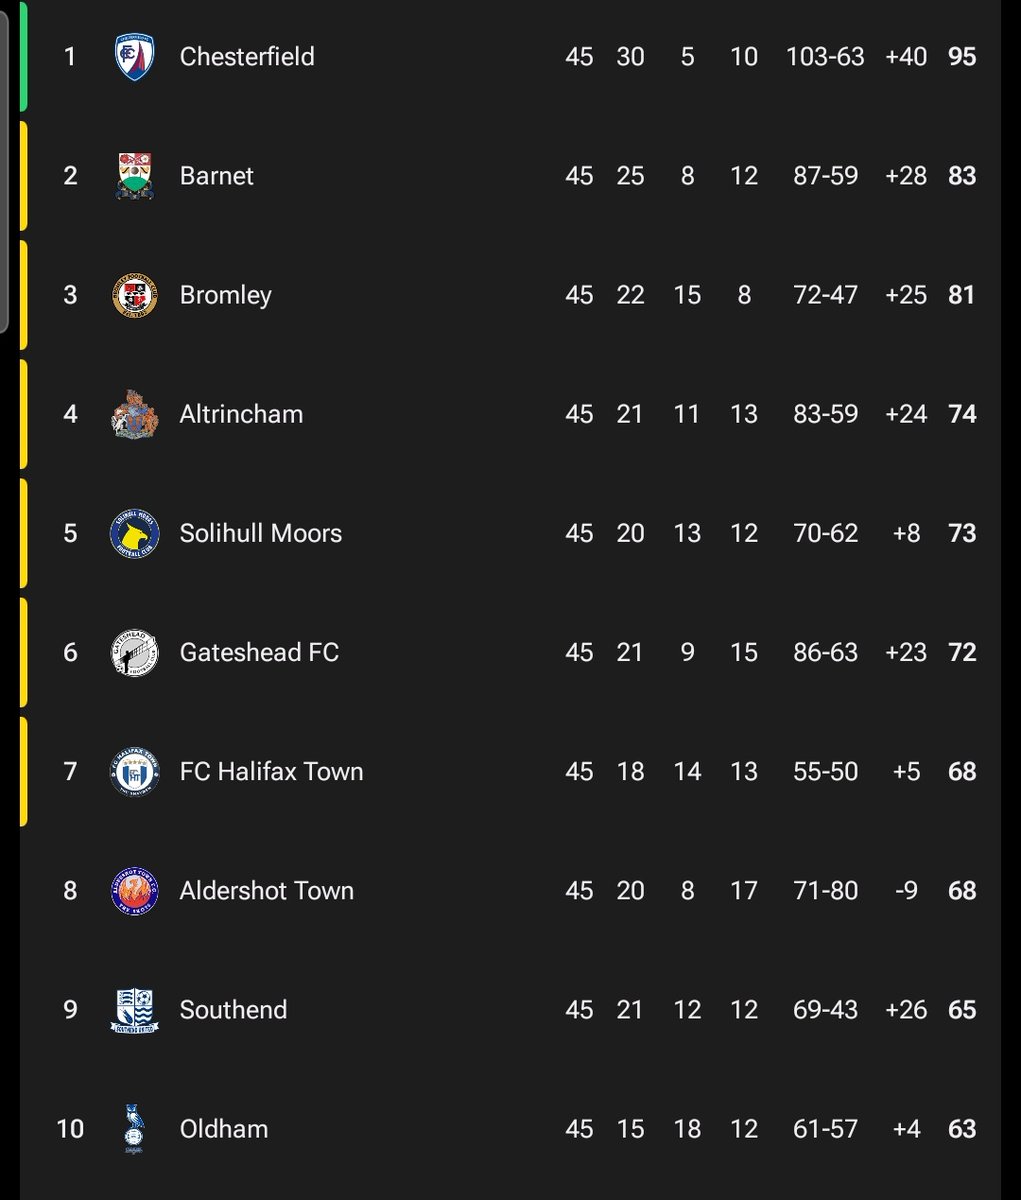 All pretty straight forward as far as the play-offs go.

@FCHTOnline finish 7th with a win. A point is enough if they match or better what #TheShots do

@OfficialShots need to better what #FCHT do

@SUFCRootsHall need to win & #FCHT & #TheShots lose